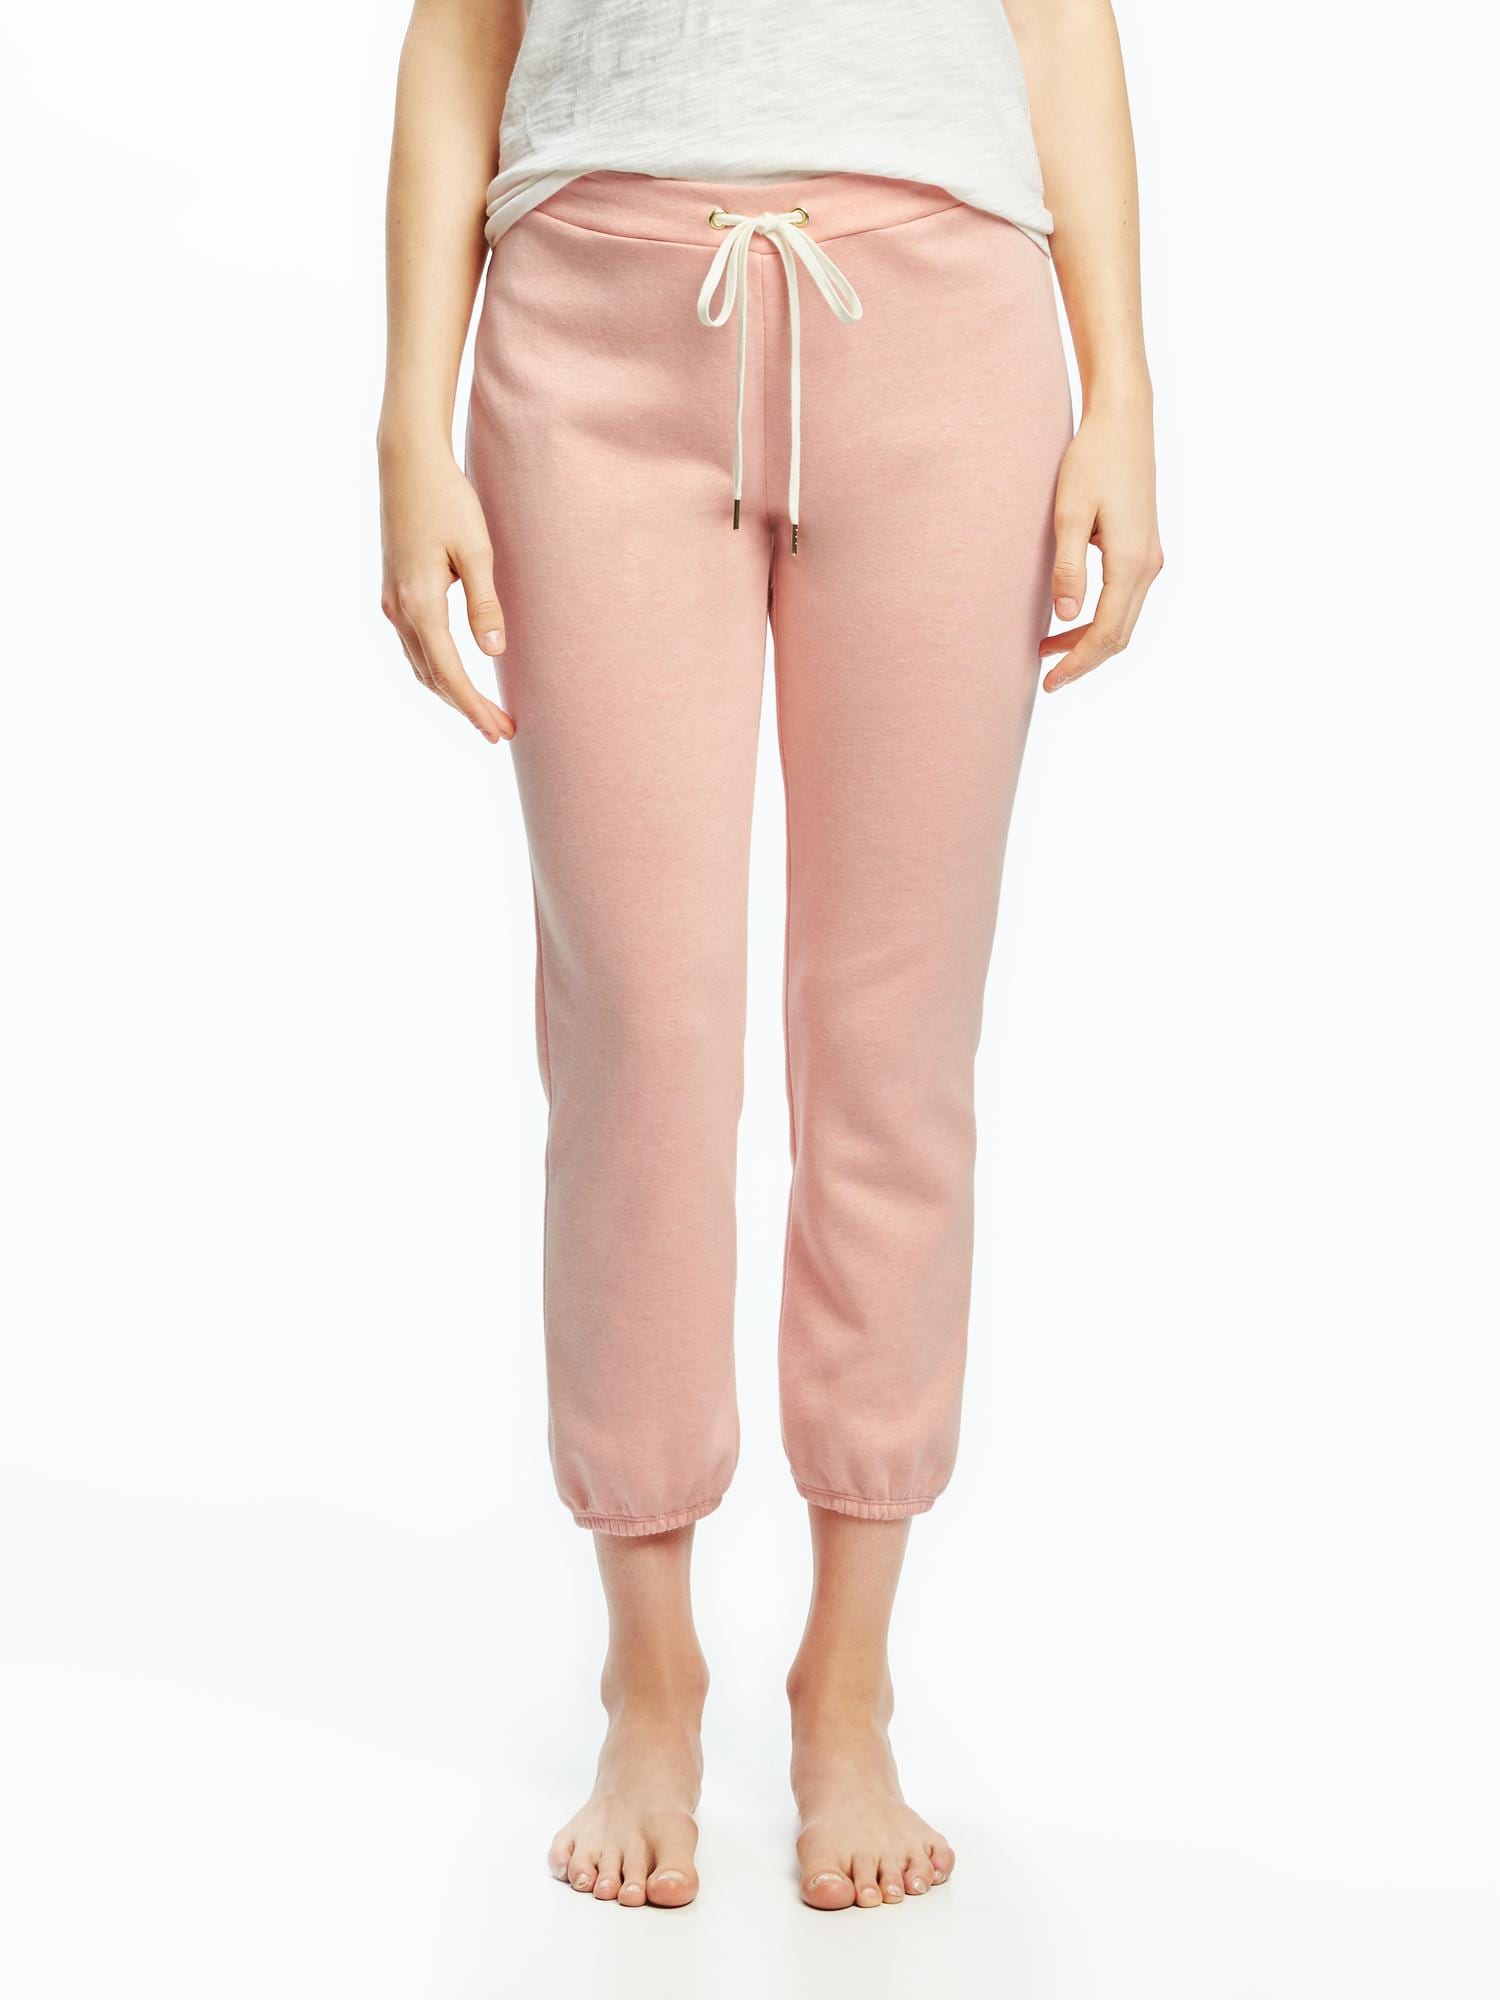 French-Terry Capri Sleep Joggers For Women Old Navy, 52% OFF